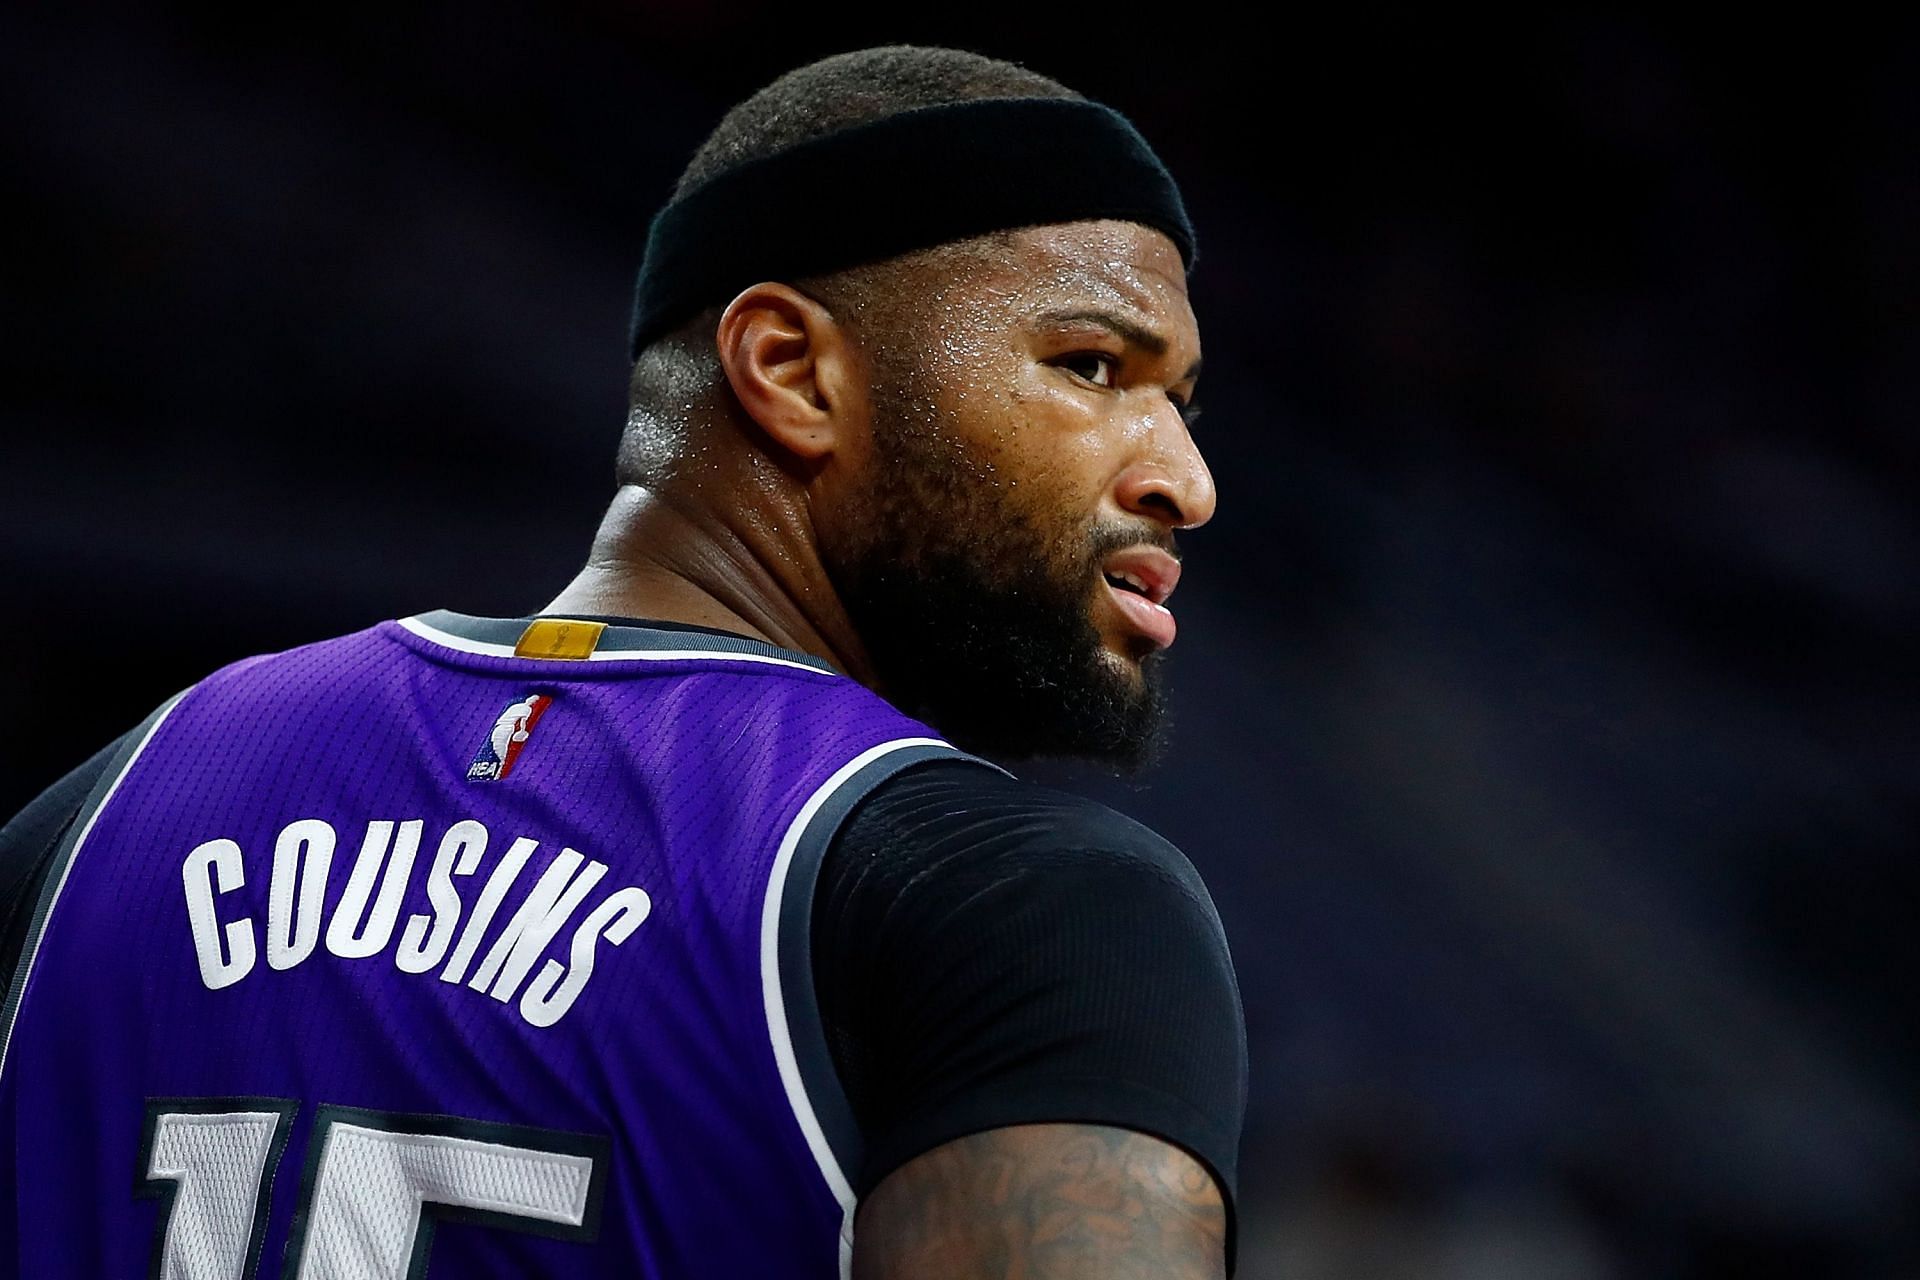 Why DeMarcus Cousins is out of NBA: 'People are afraid